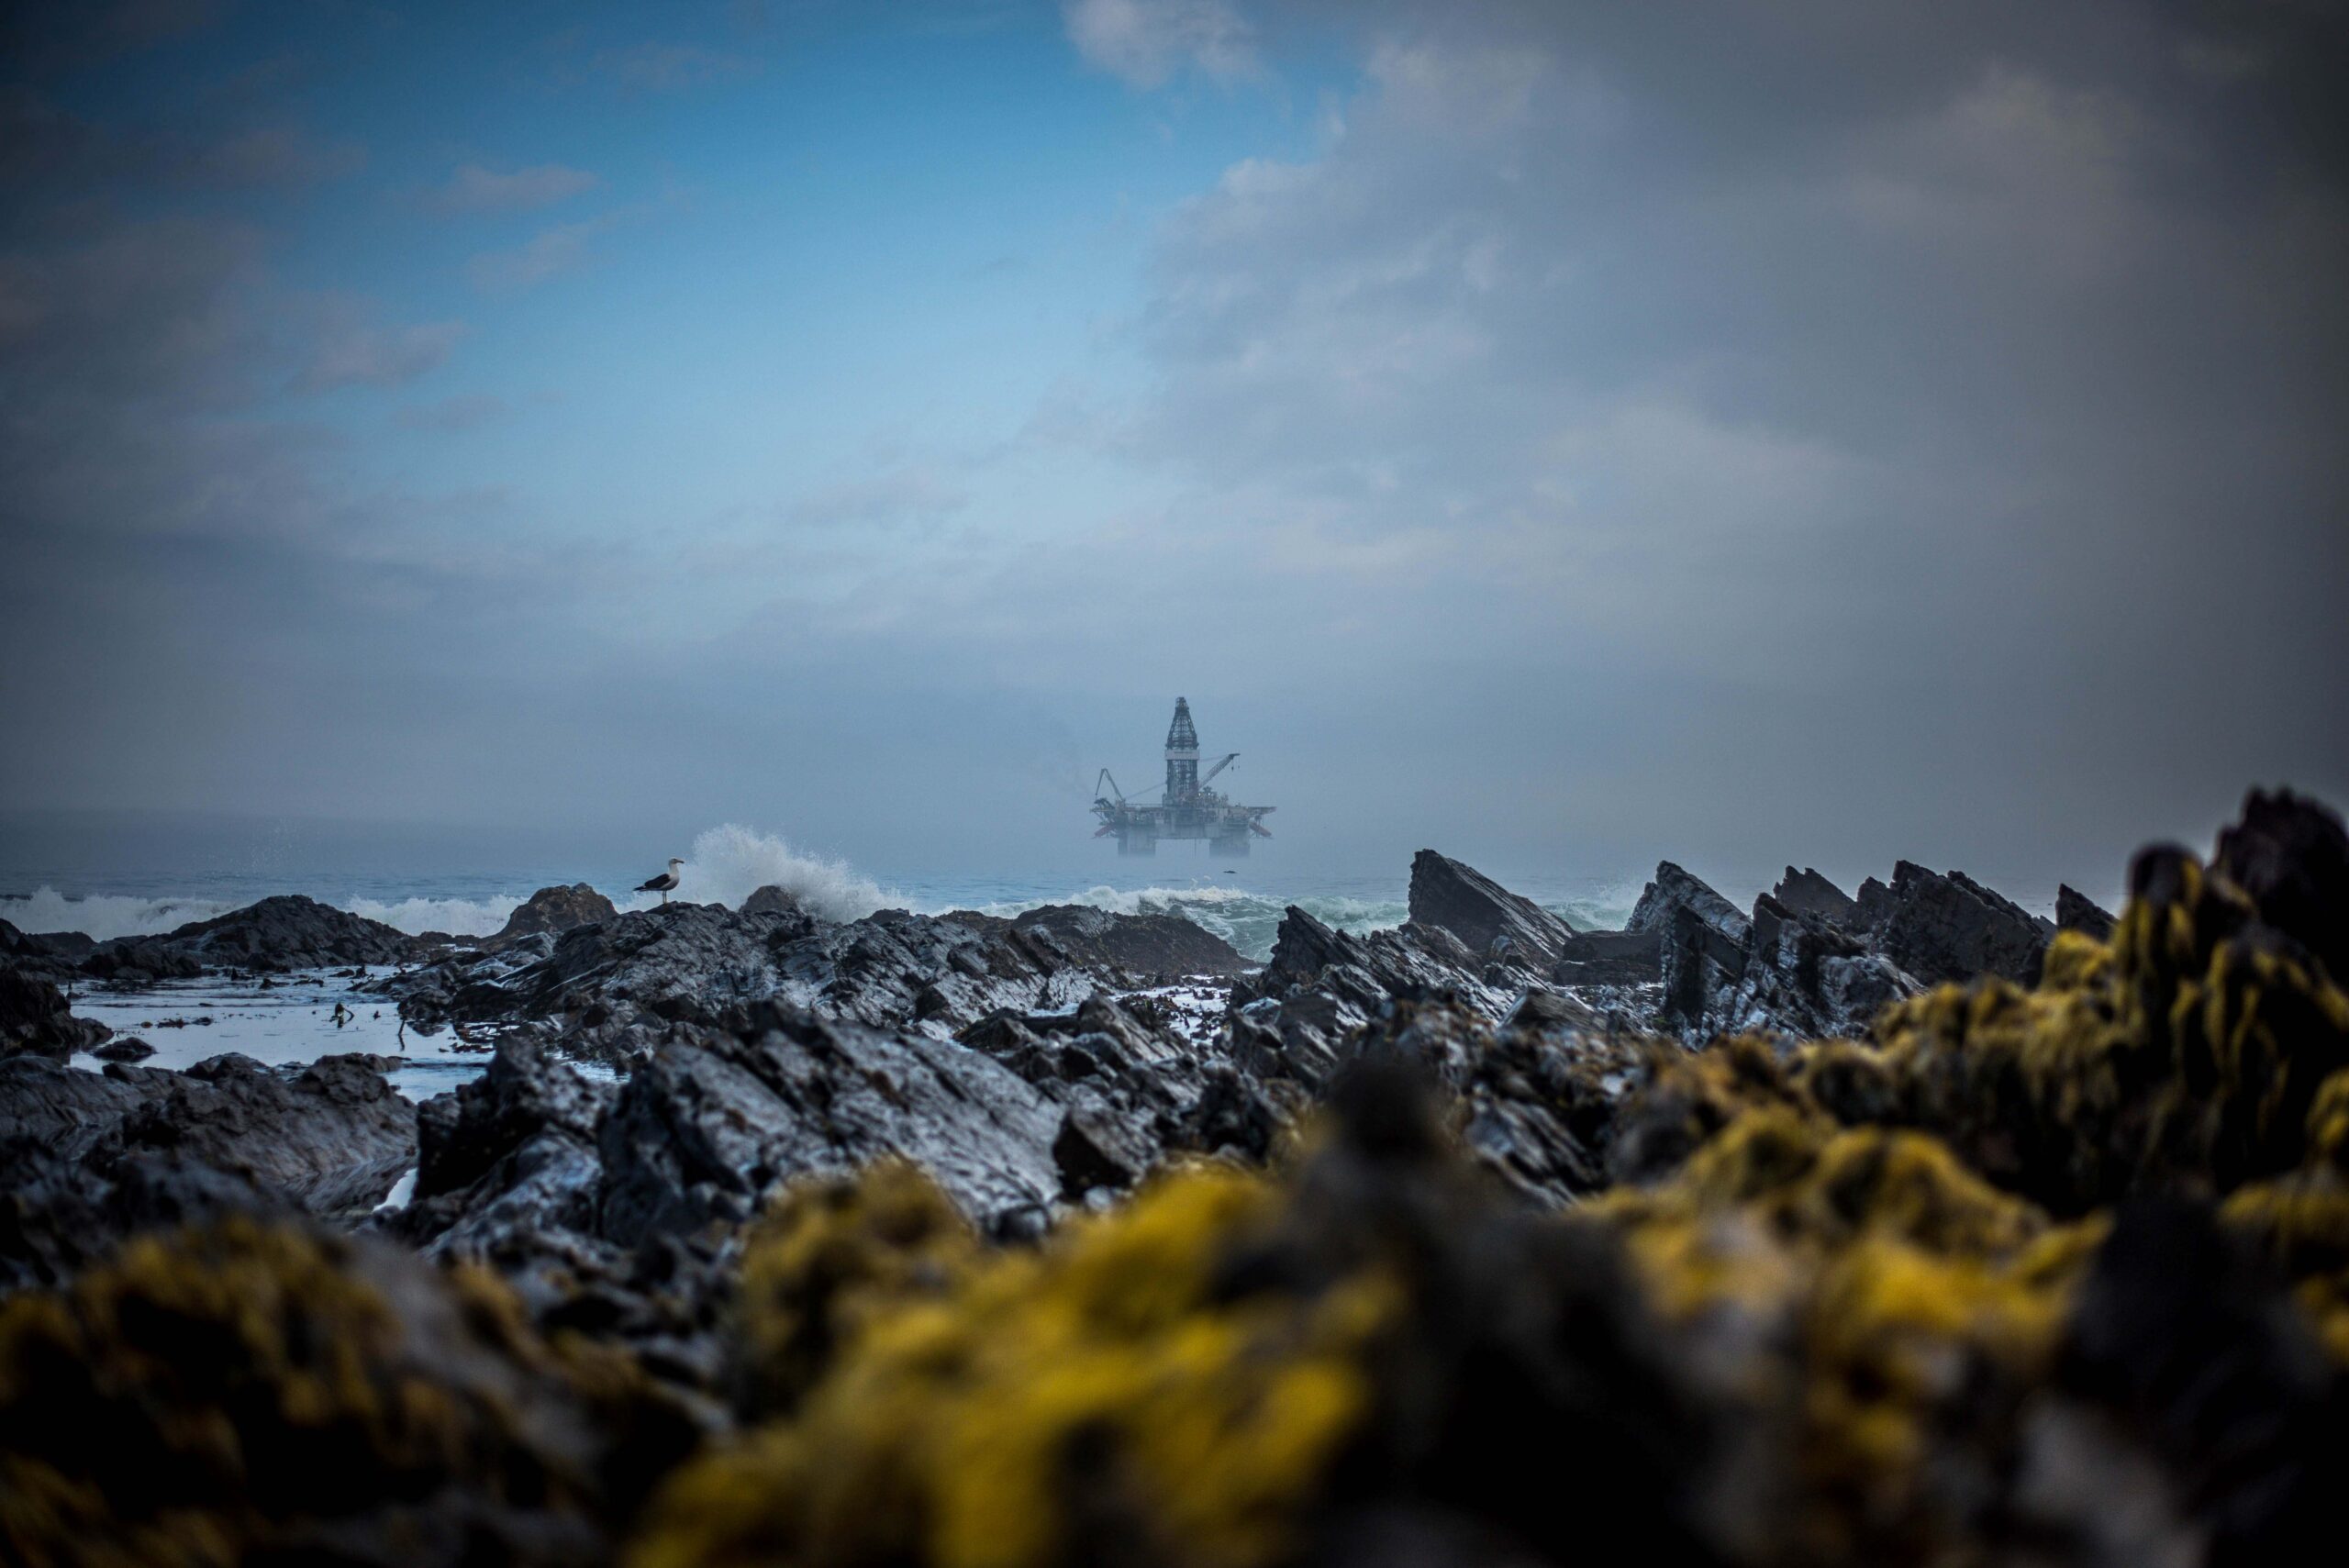 Oil platform in the background with rocky shore in front